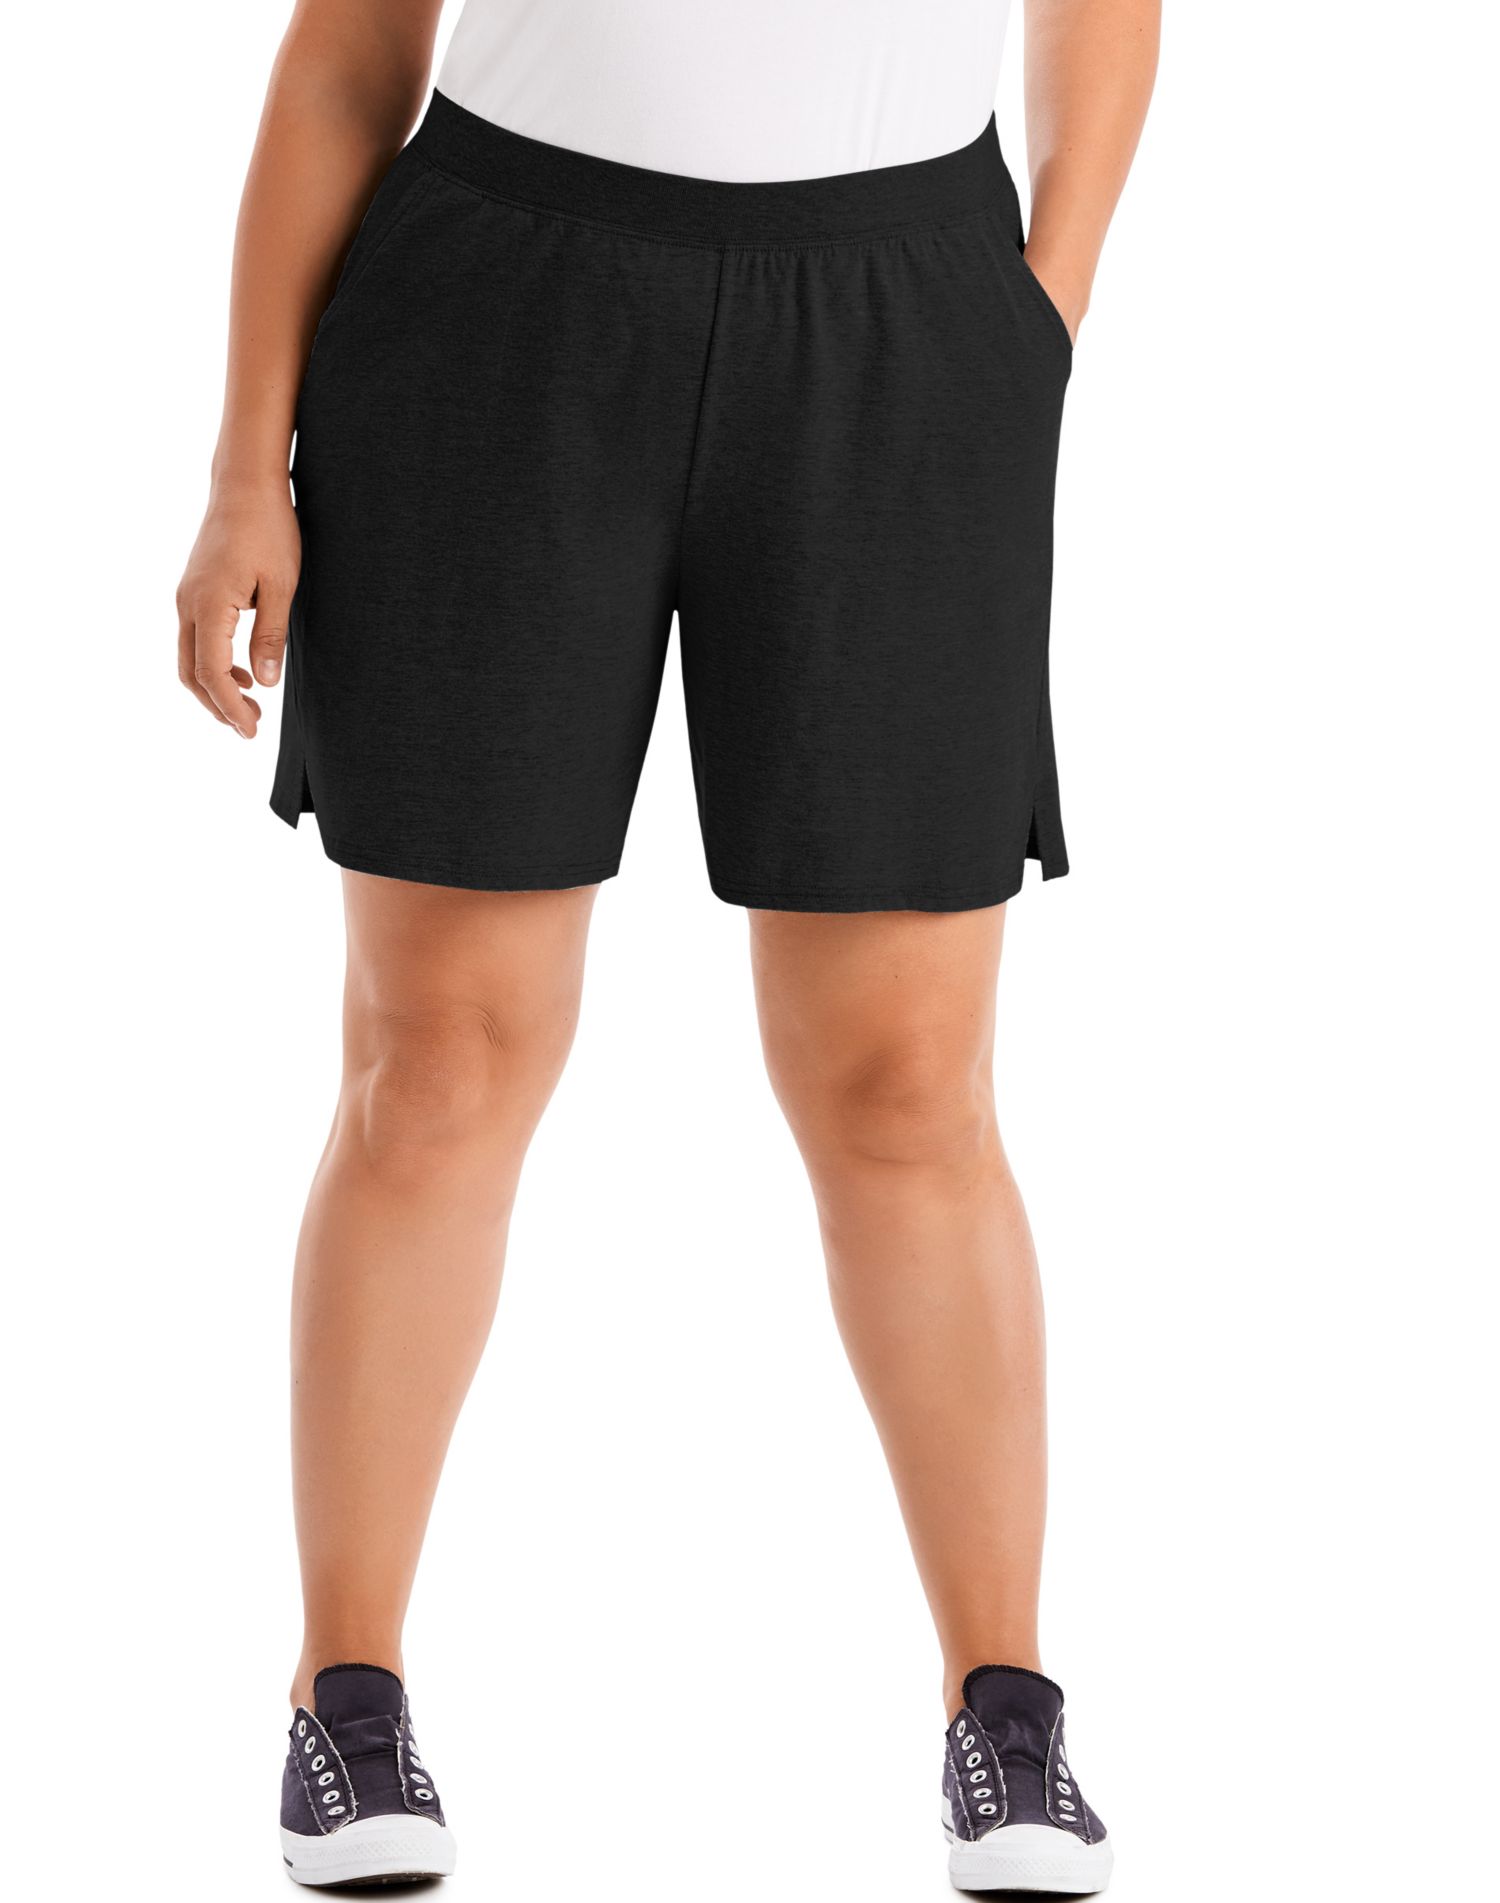 JMS Womens Cotton Jersey Pull-On Shorts - Apparel Direct Distributor